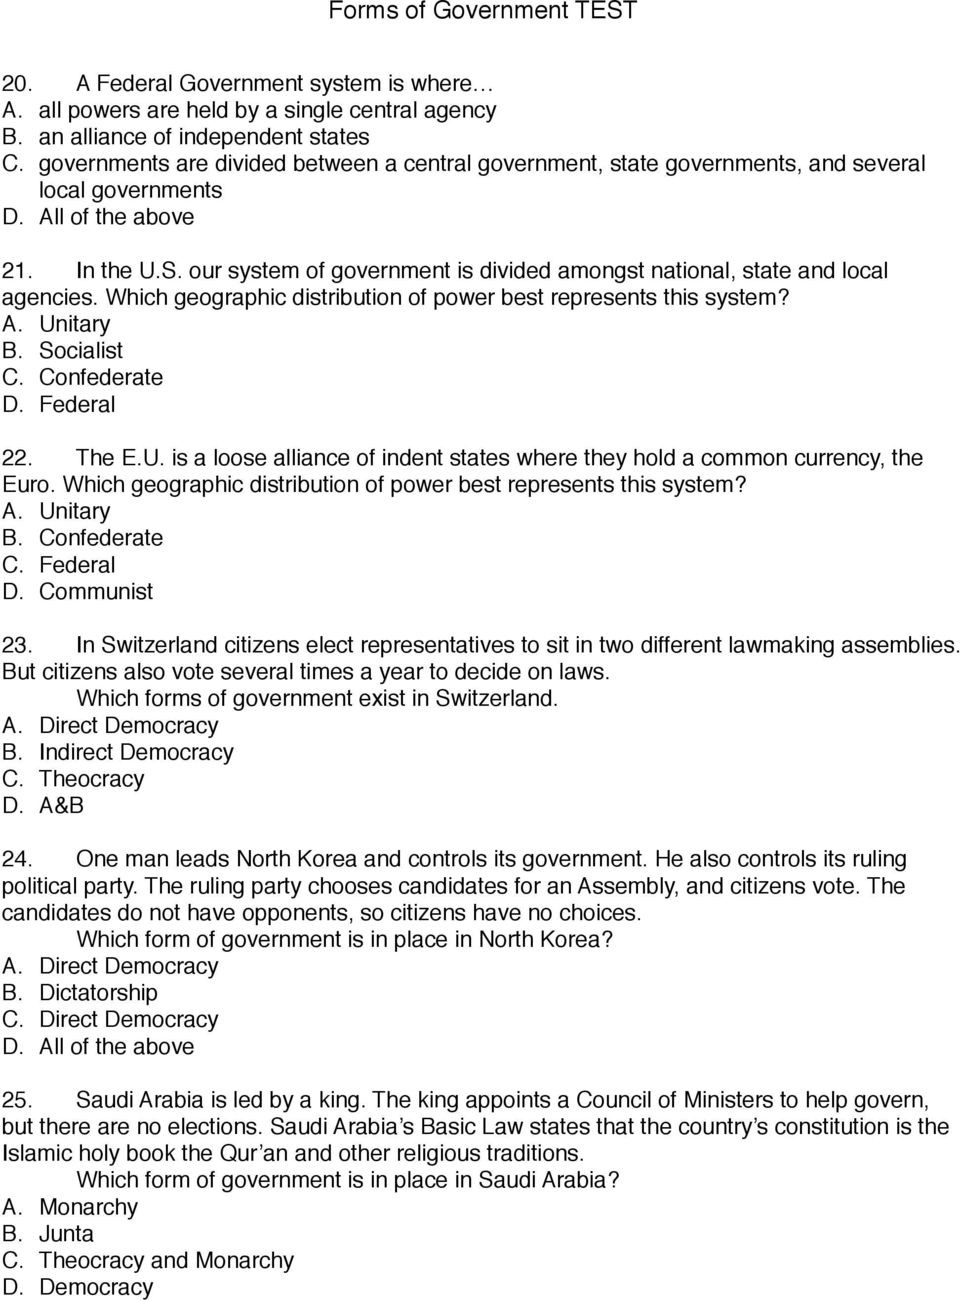 Forms Of Government Worksheet forms Of Government Test Pdf Free Download